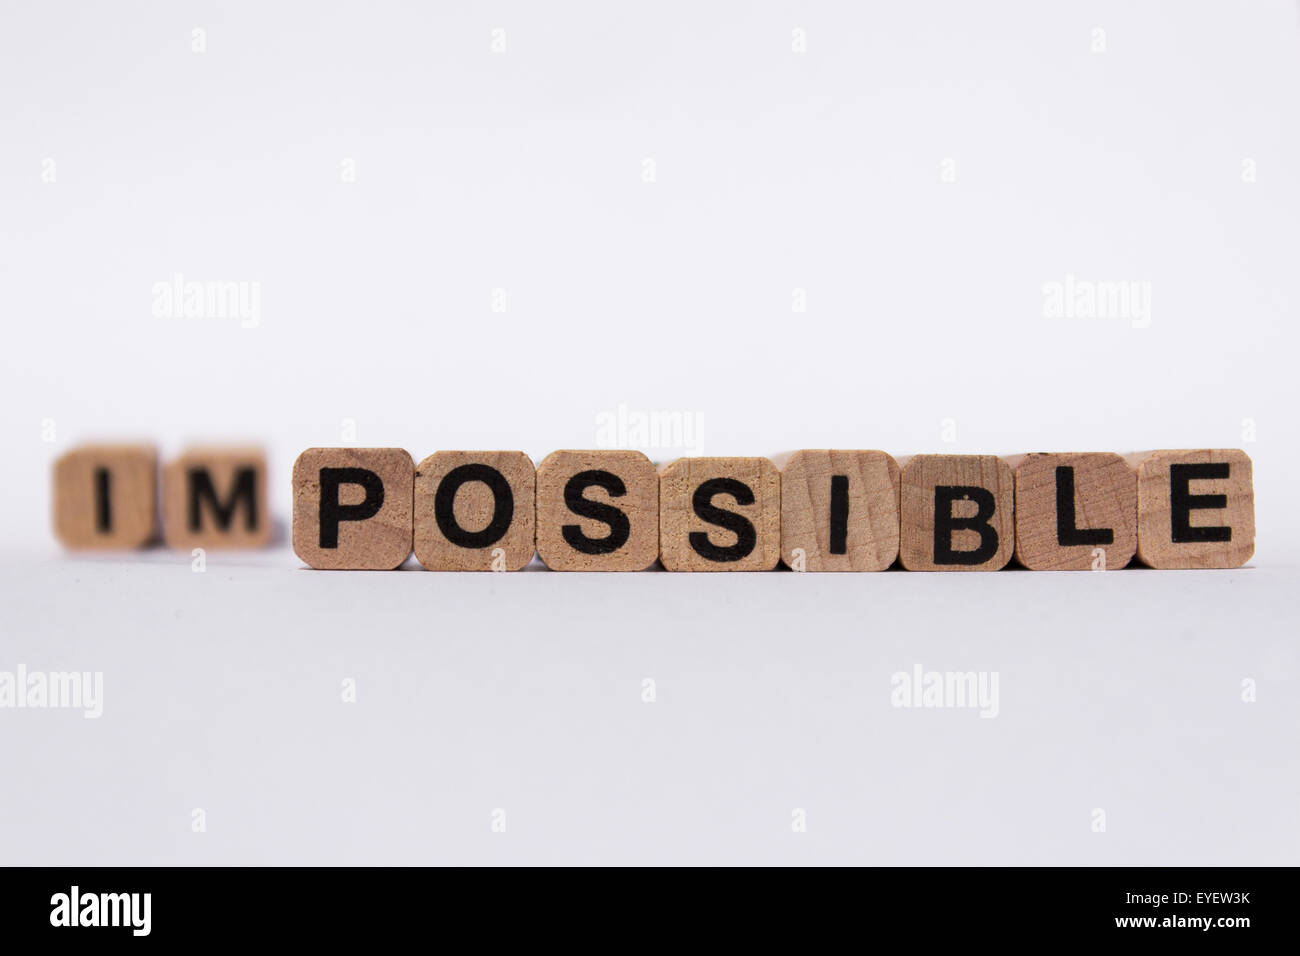 possible / impossible , motivation metaphor / concept text on white Stock Photo